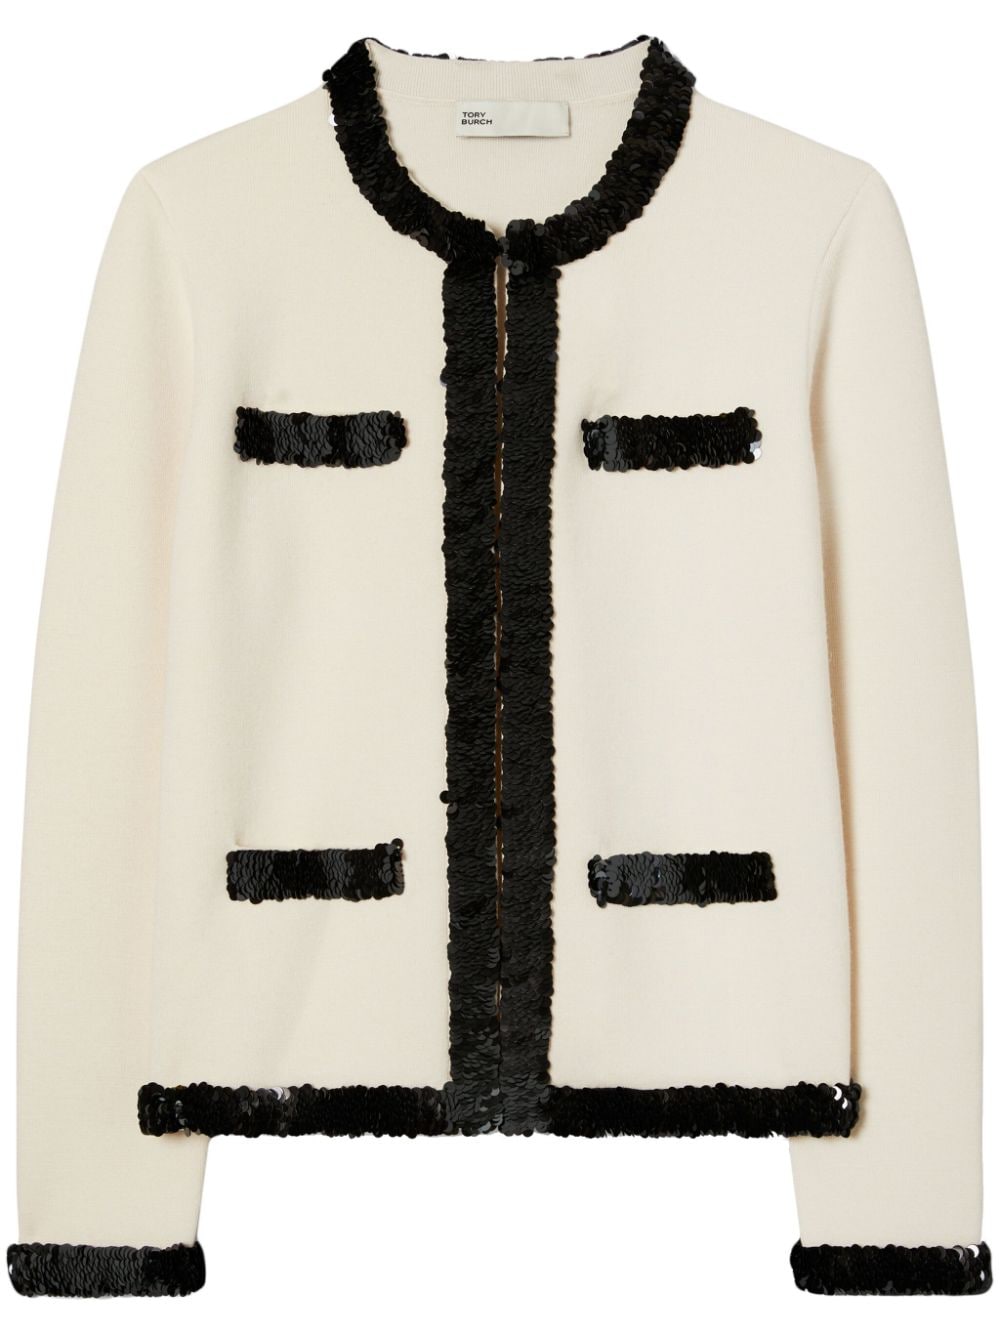 Tory Burch Kendra sequin-embellished cardigan - White von Tory Burch